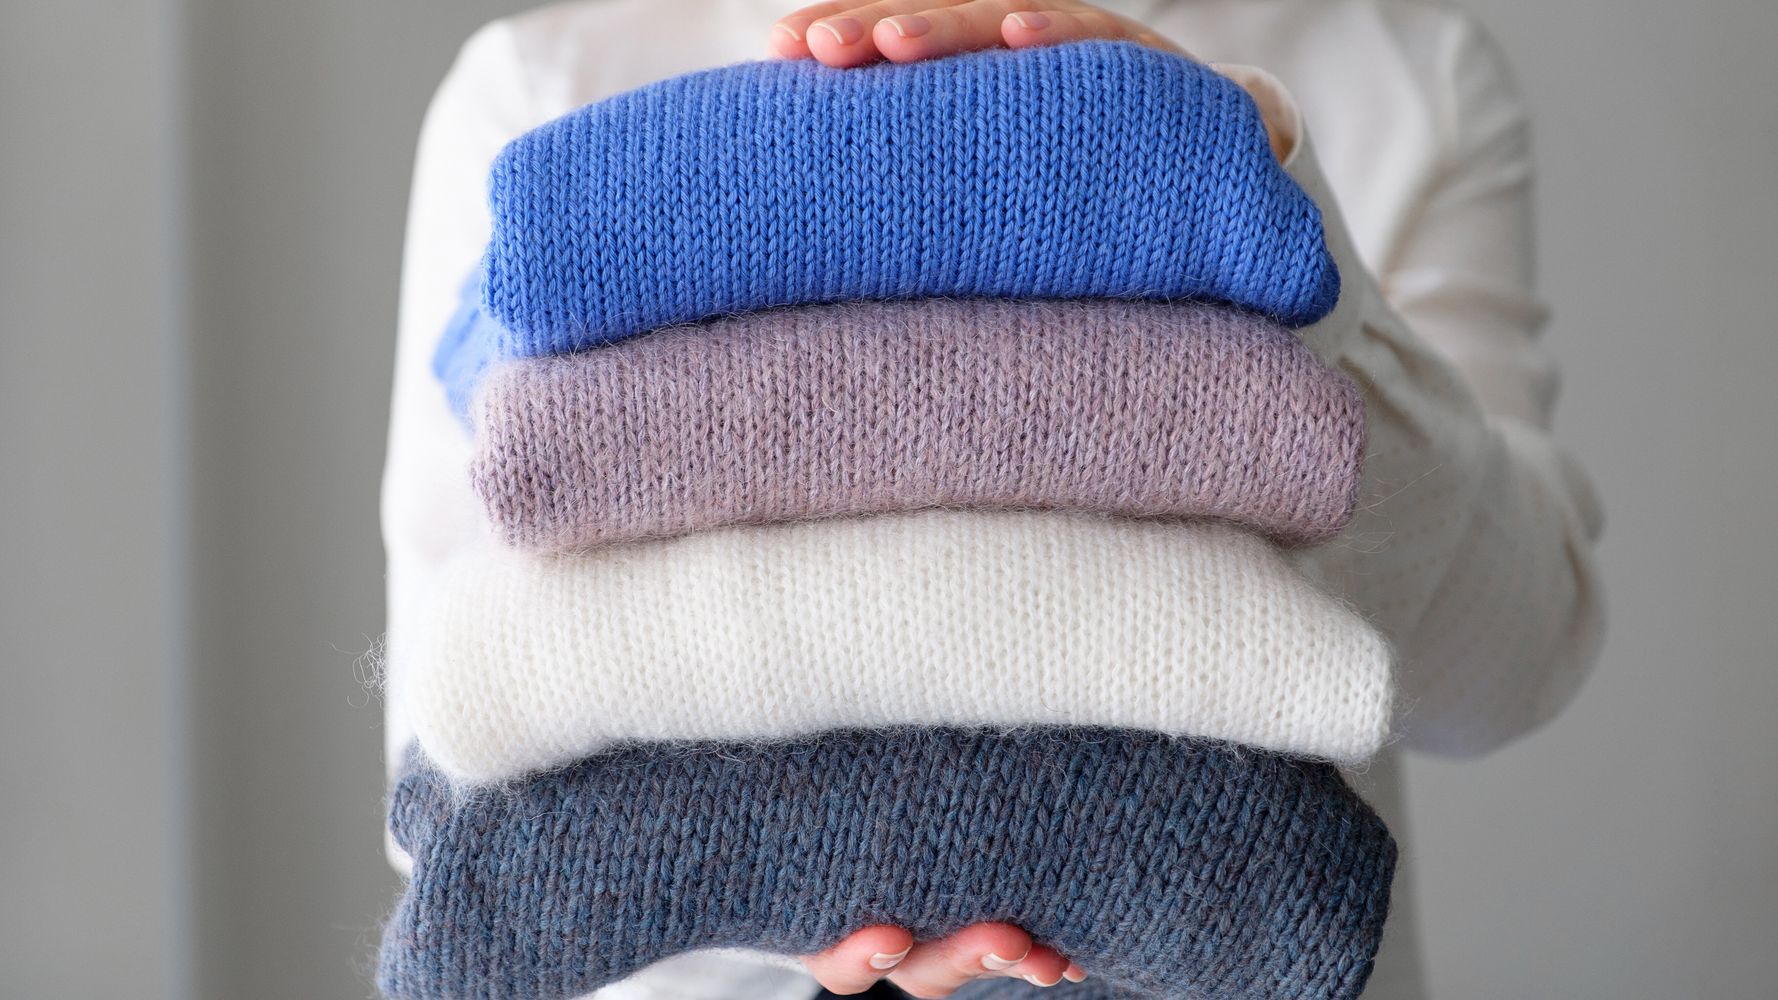 Cashmere vs Cotton – What Are The Differences?